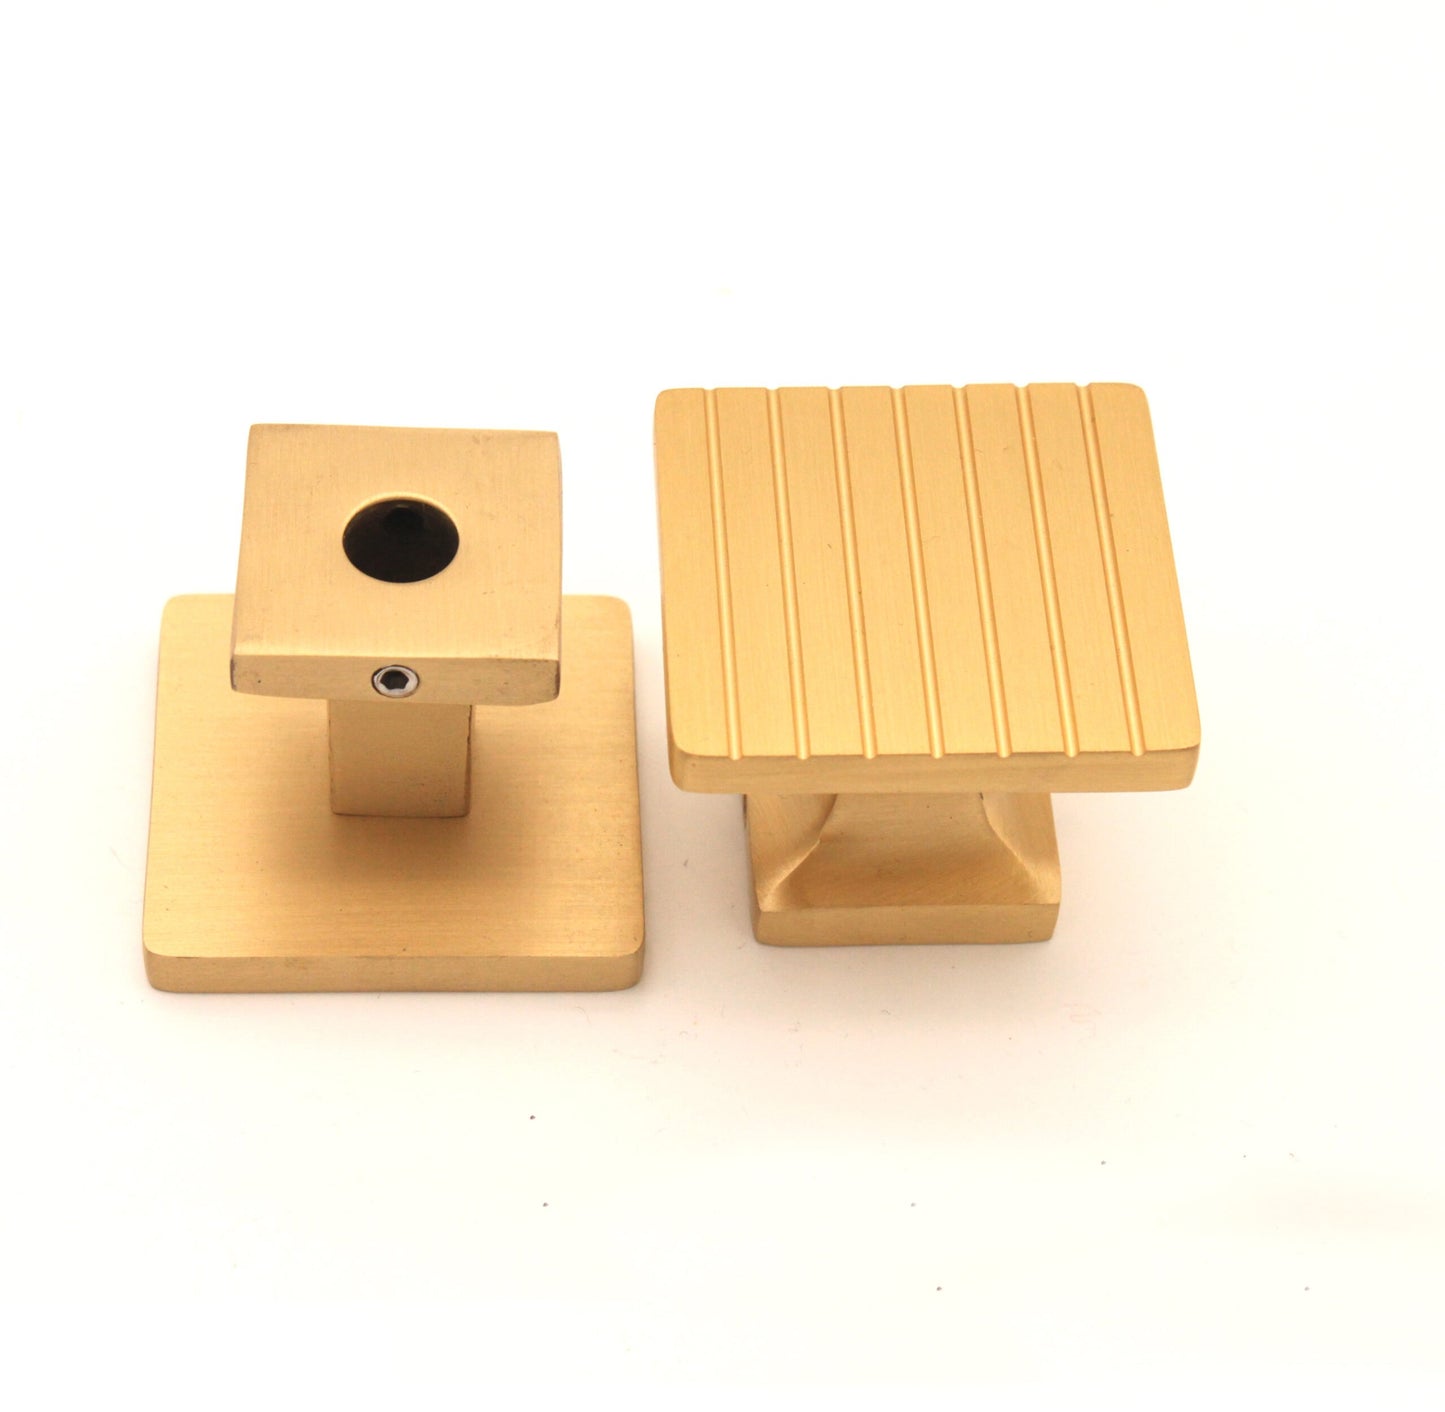 Striped Brass Cabinet Handles - Small